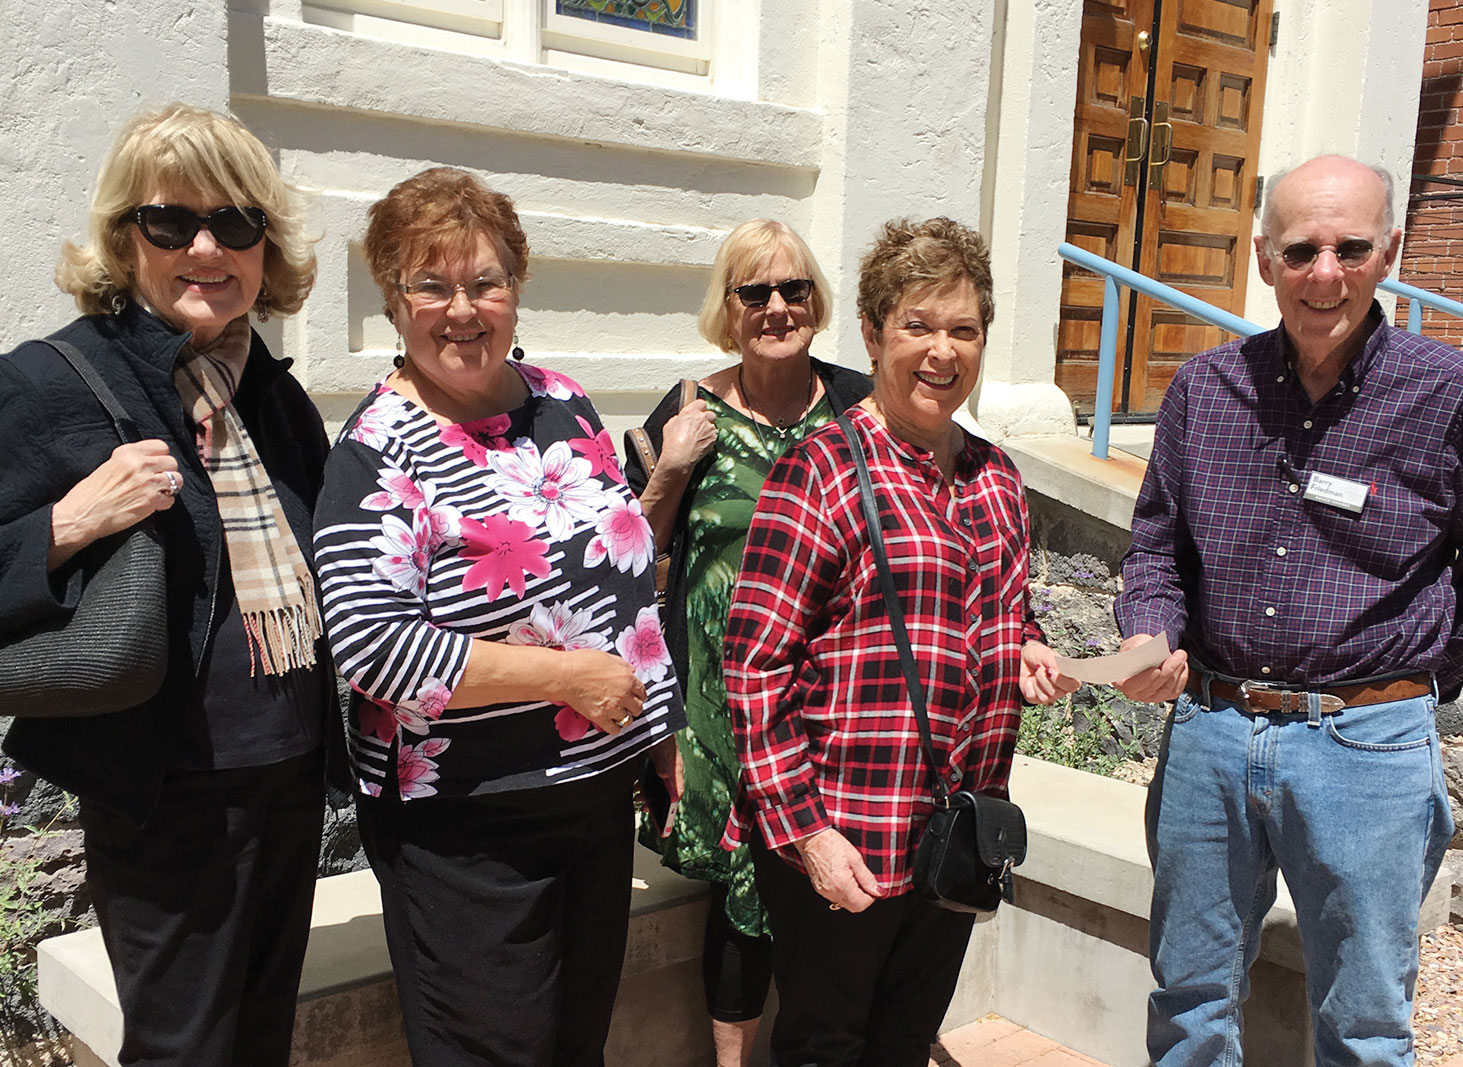 In front of the 1910 synagogue are Quester members Marilyn Bertke, Rose Meyer, Linda Holt and Libby Cohen presenting the check to JHM Board President Barry Friedman.